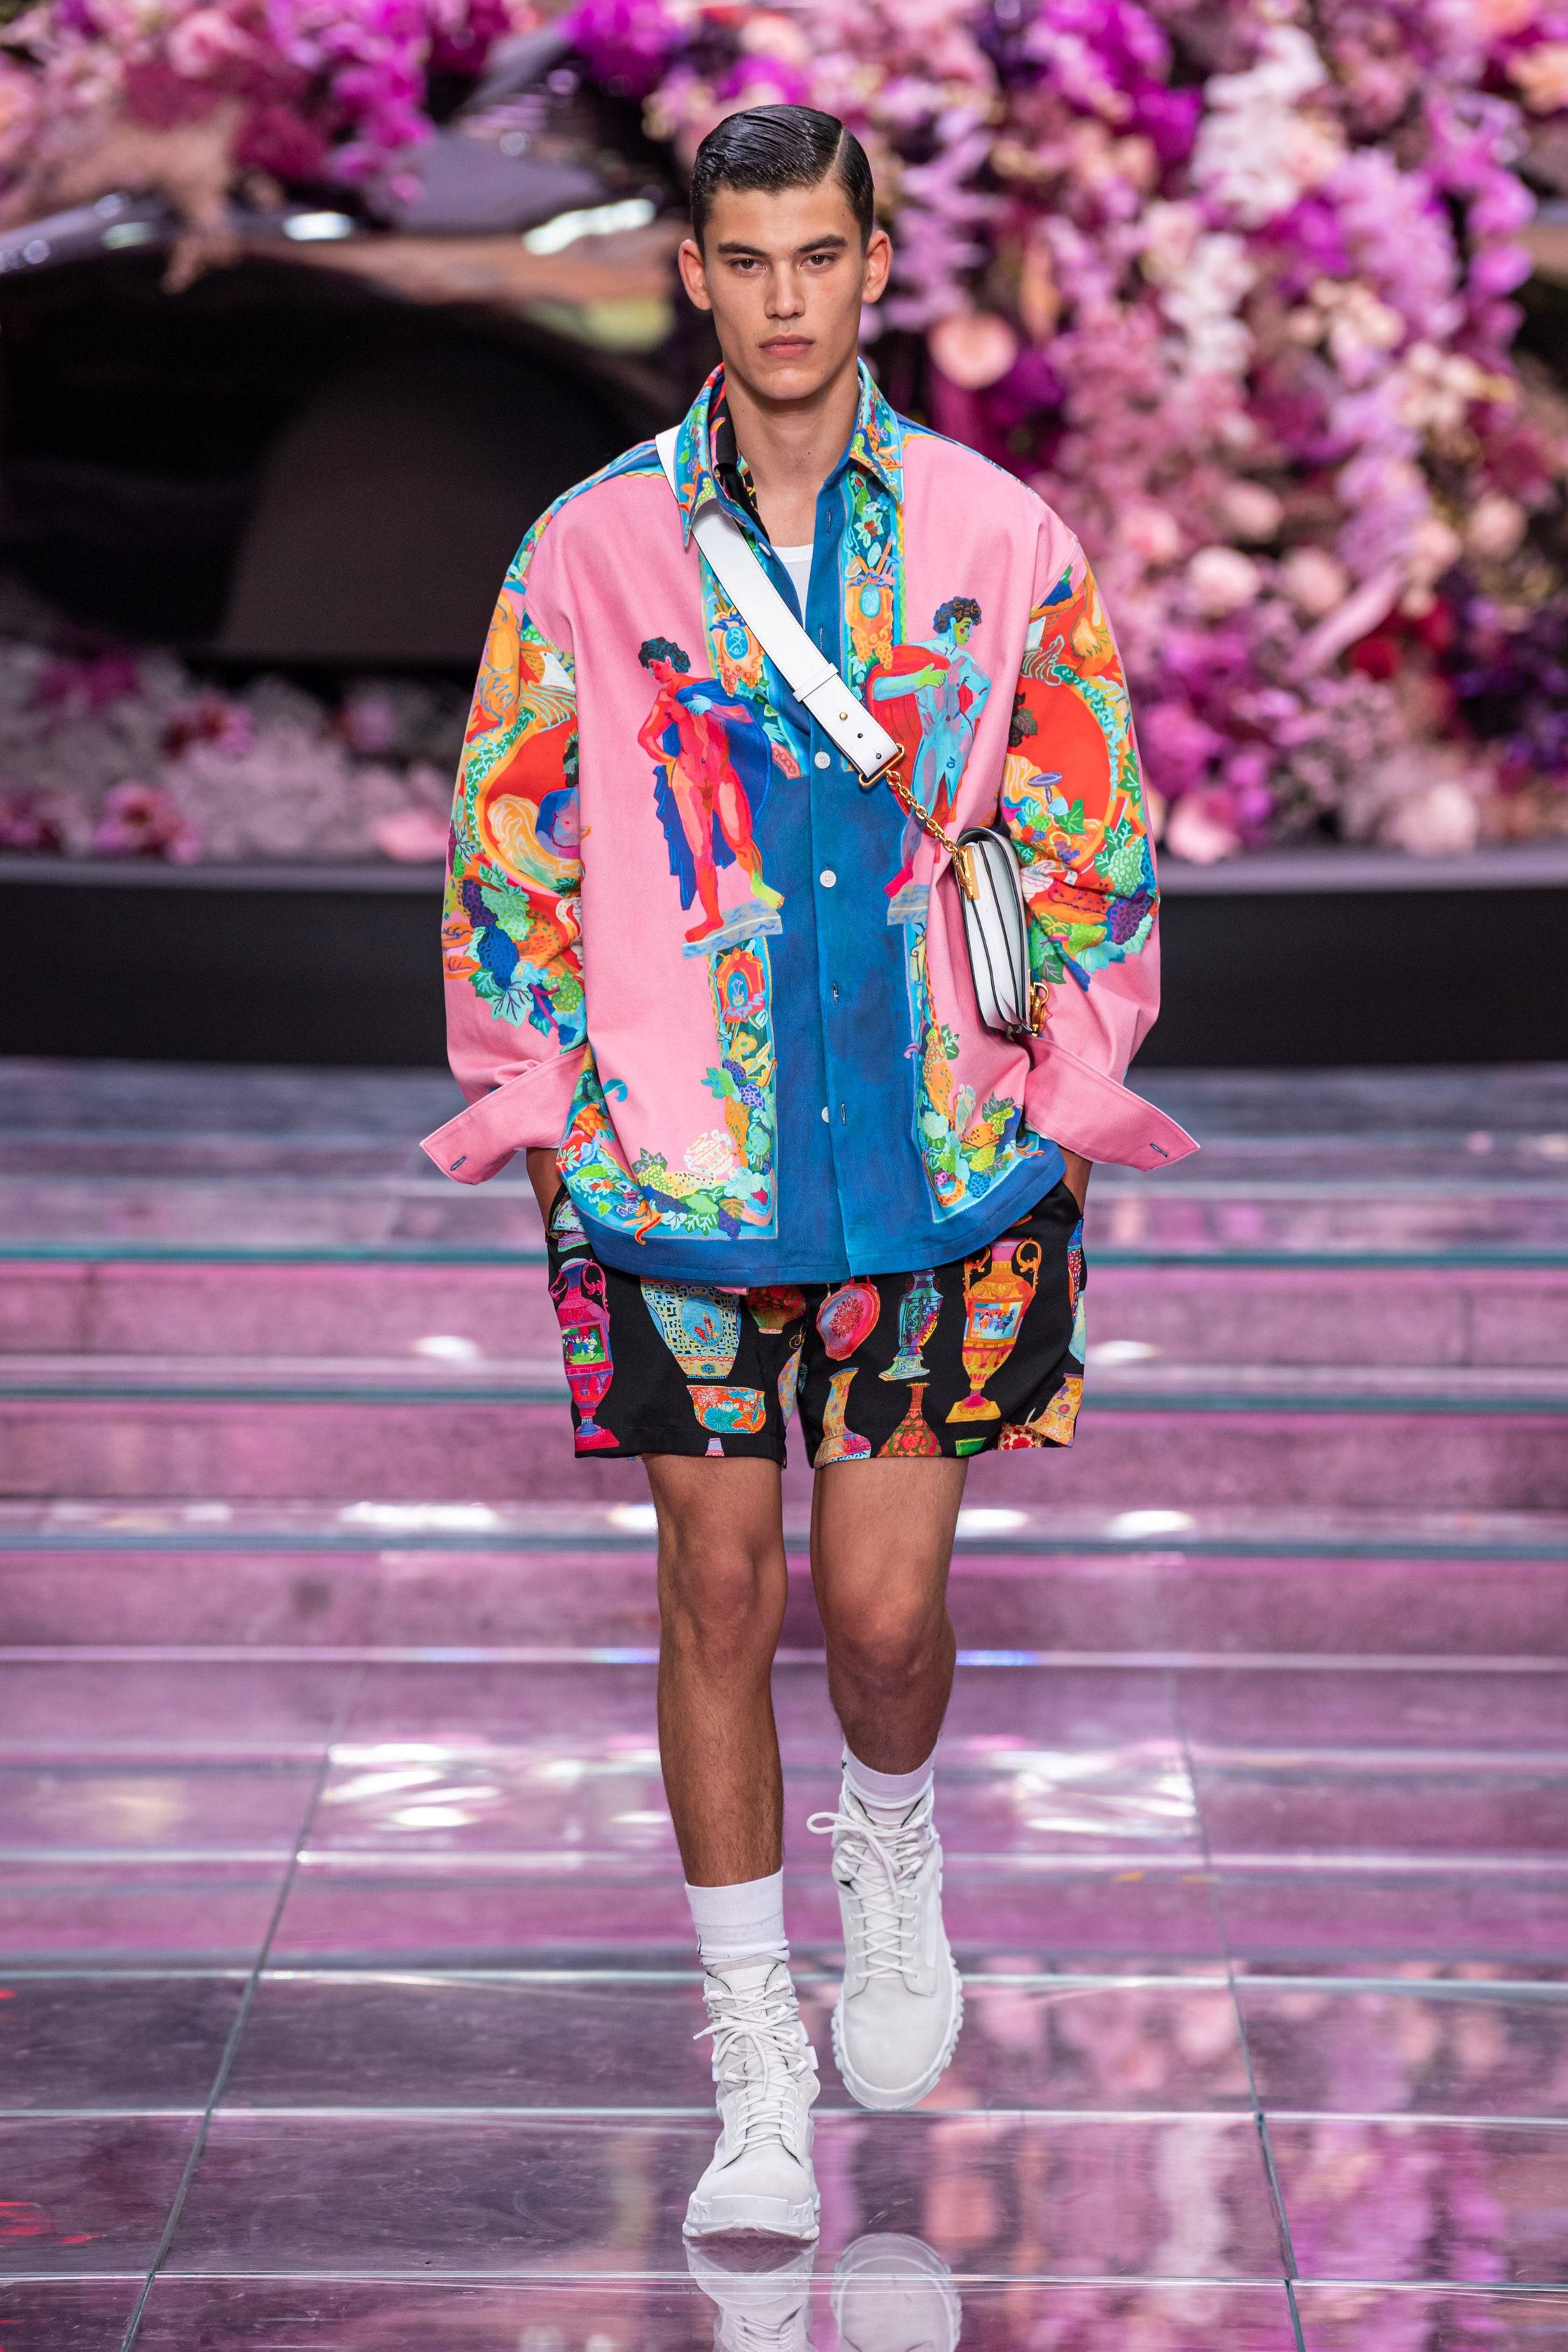 new VERSACE 2020 Runway Andy Dixon Caravaggio Archive pink silk shirt EU39 M
Reference: TGAS/C00091
Brand: Versace
Designer: Donatella Versace
Collection: Spring Summer 2020 Runway
Material: Silk
Color: Pink
Pattern: Caraggio
Closure: Button
Extra